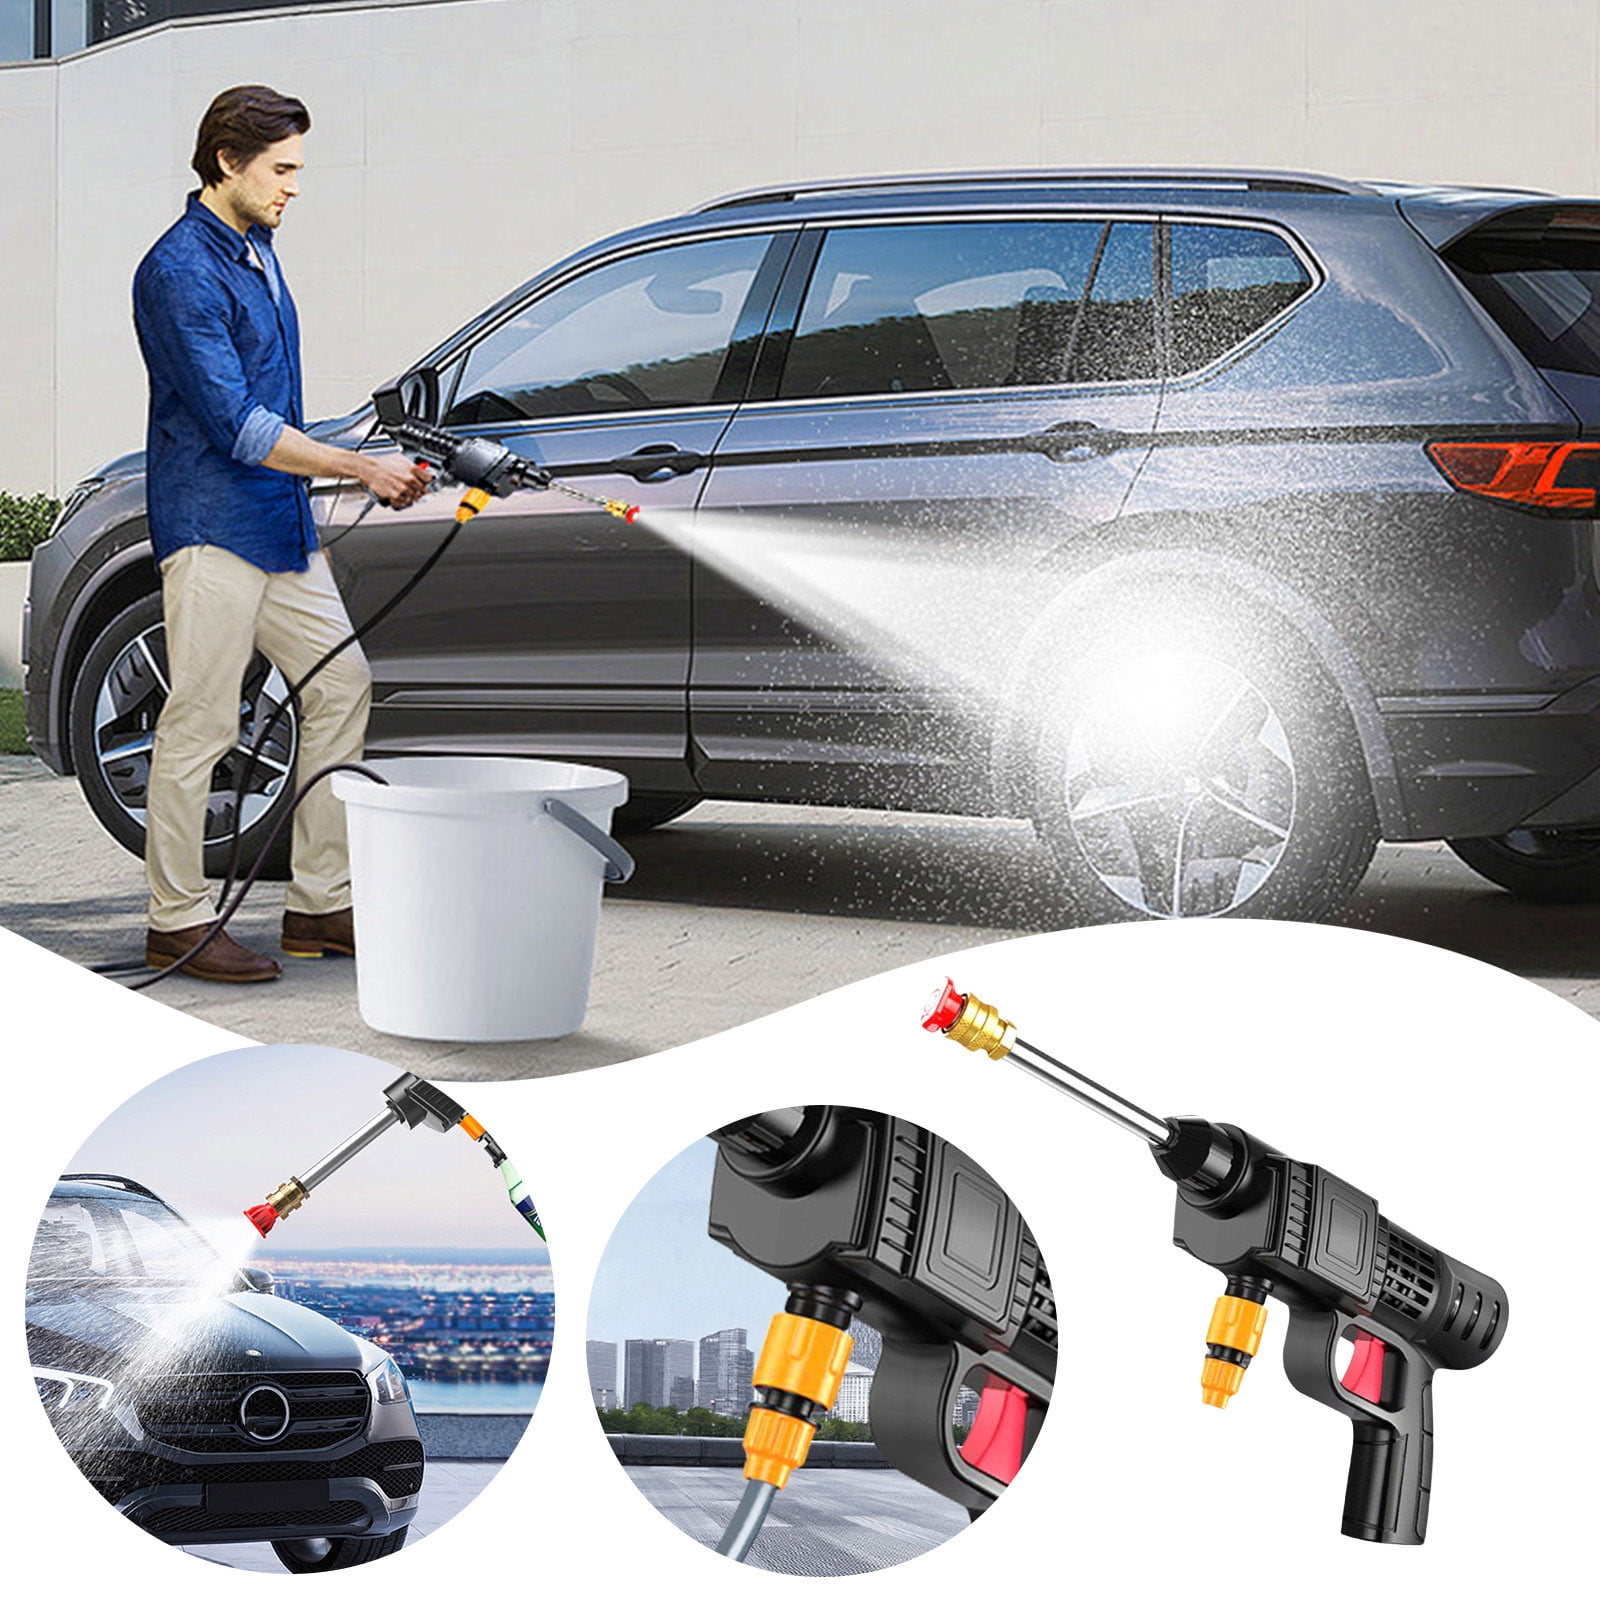 Cordless High Pressure Washer, Battery Operated Car Cleaning Power Washer  Cleaner with 2 Nozzles, Black